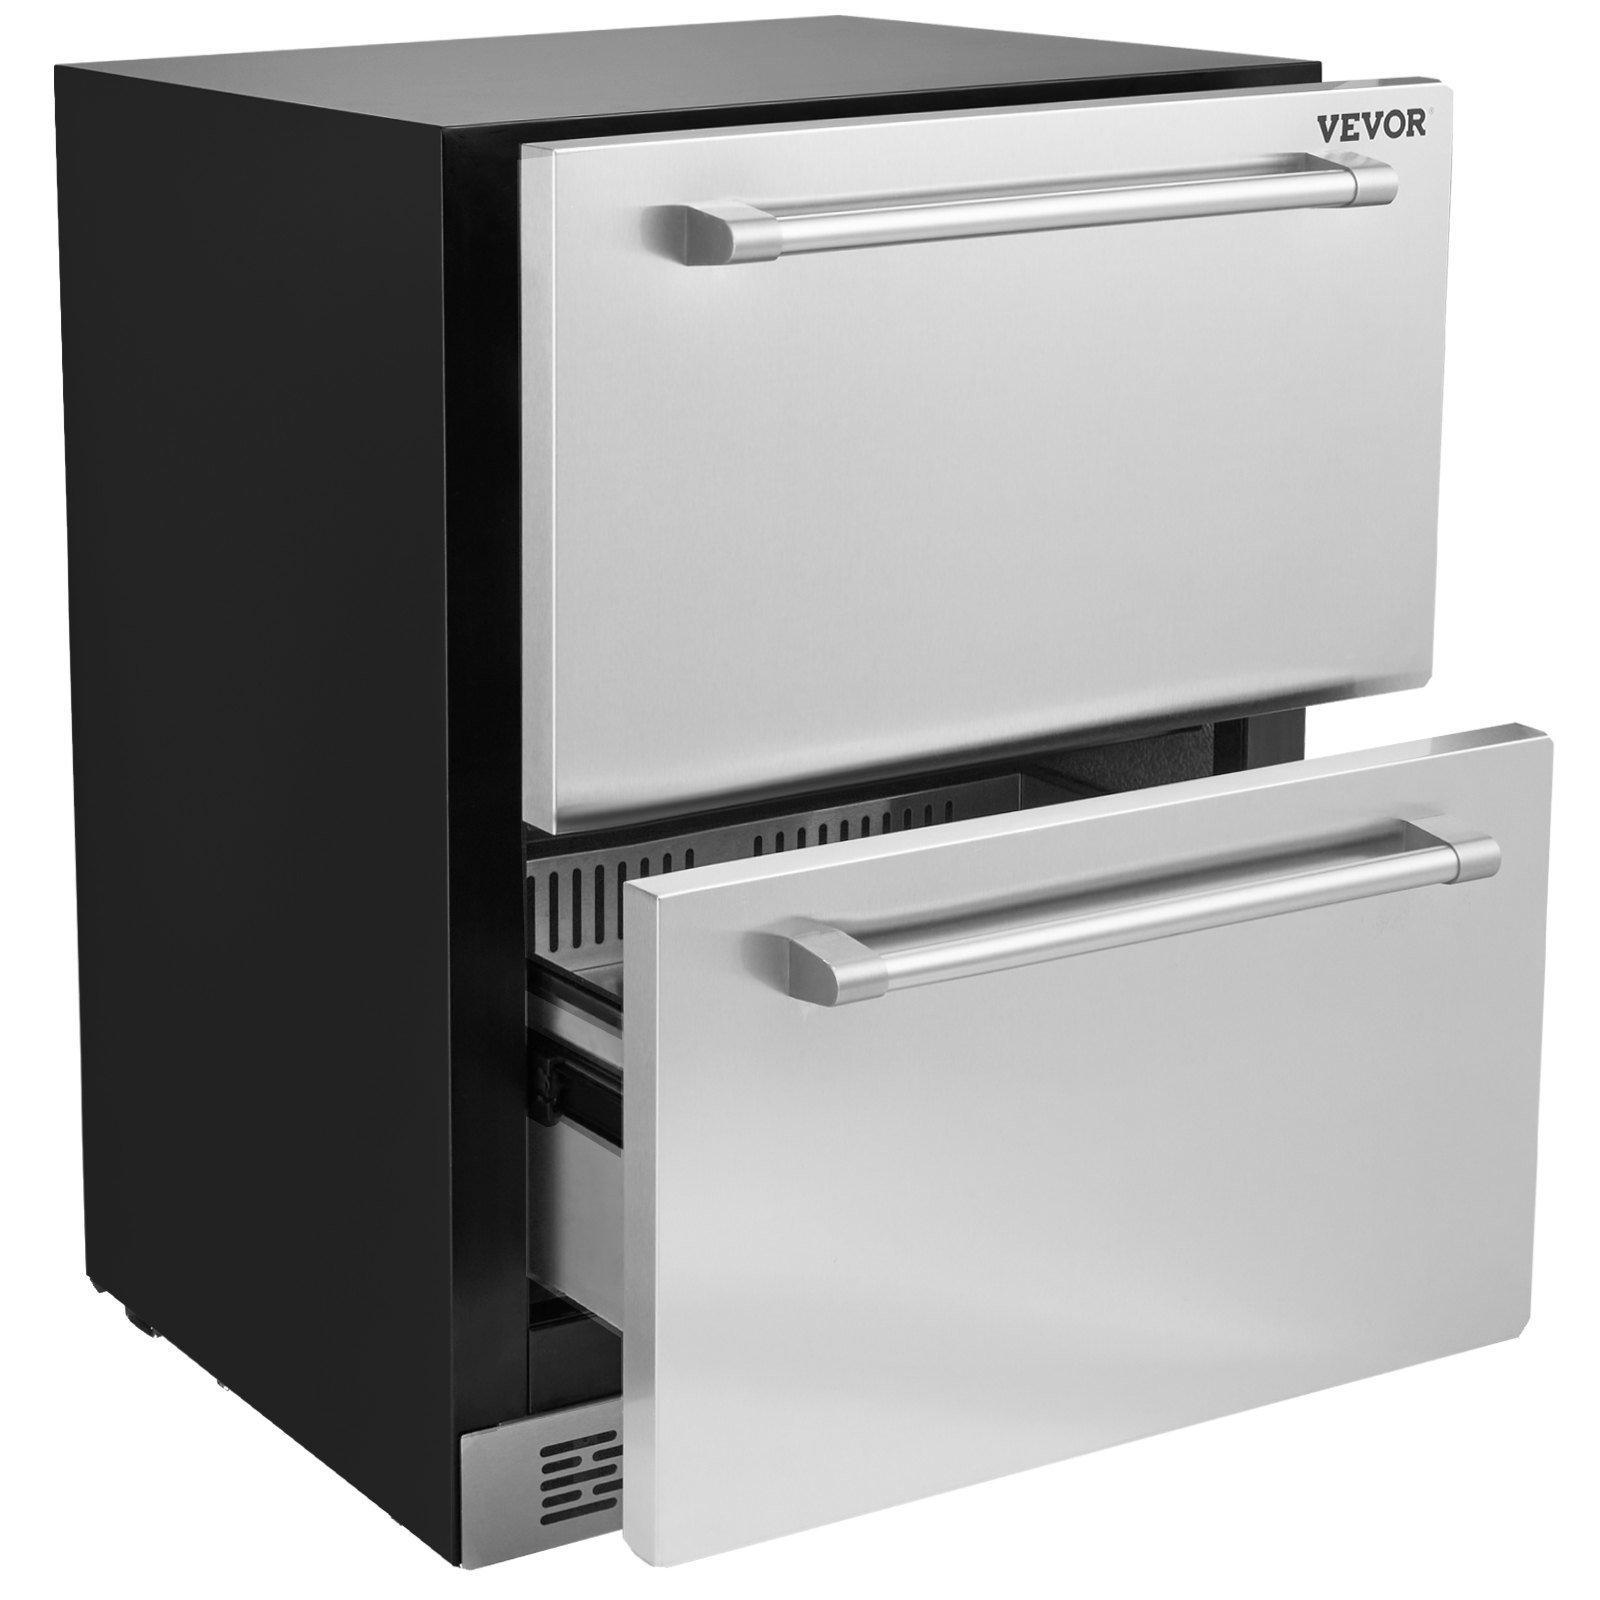 Stainless steel double drawer refrigerator